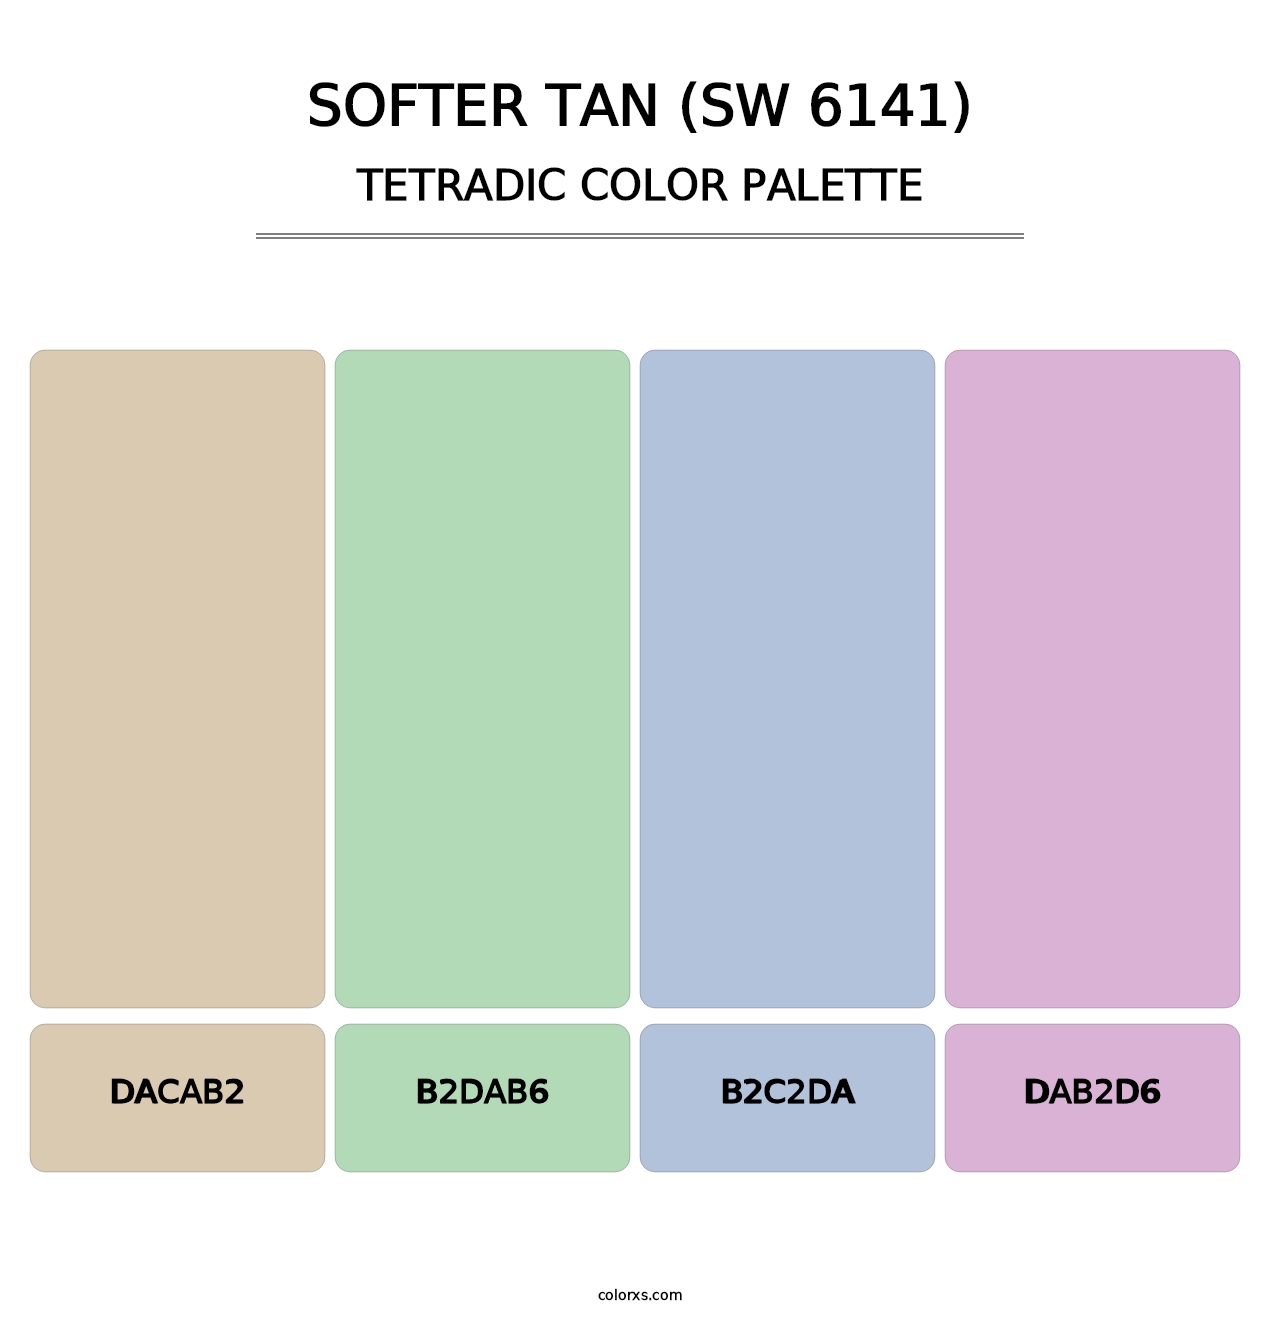 Softer Tan (SW 6141) - Tetradic Color Palette